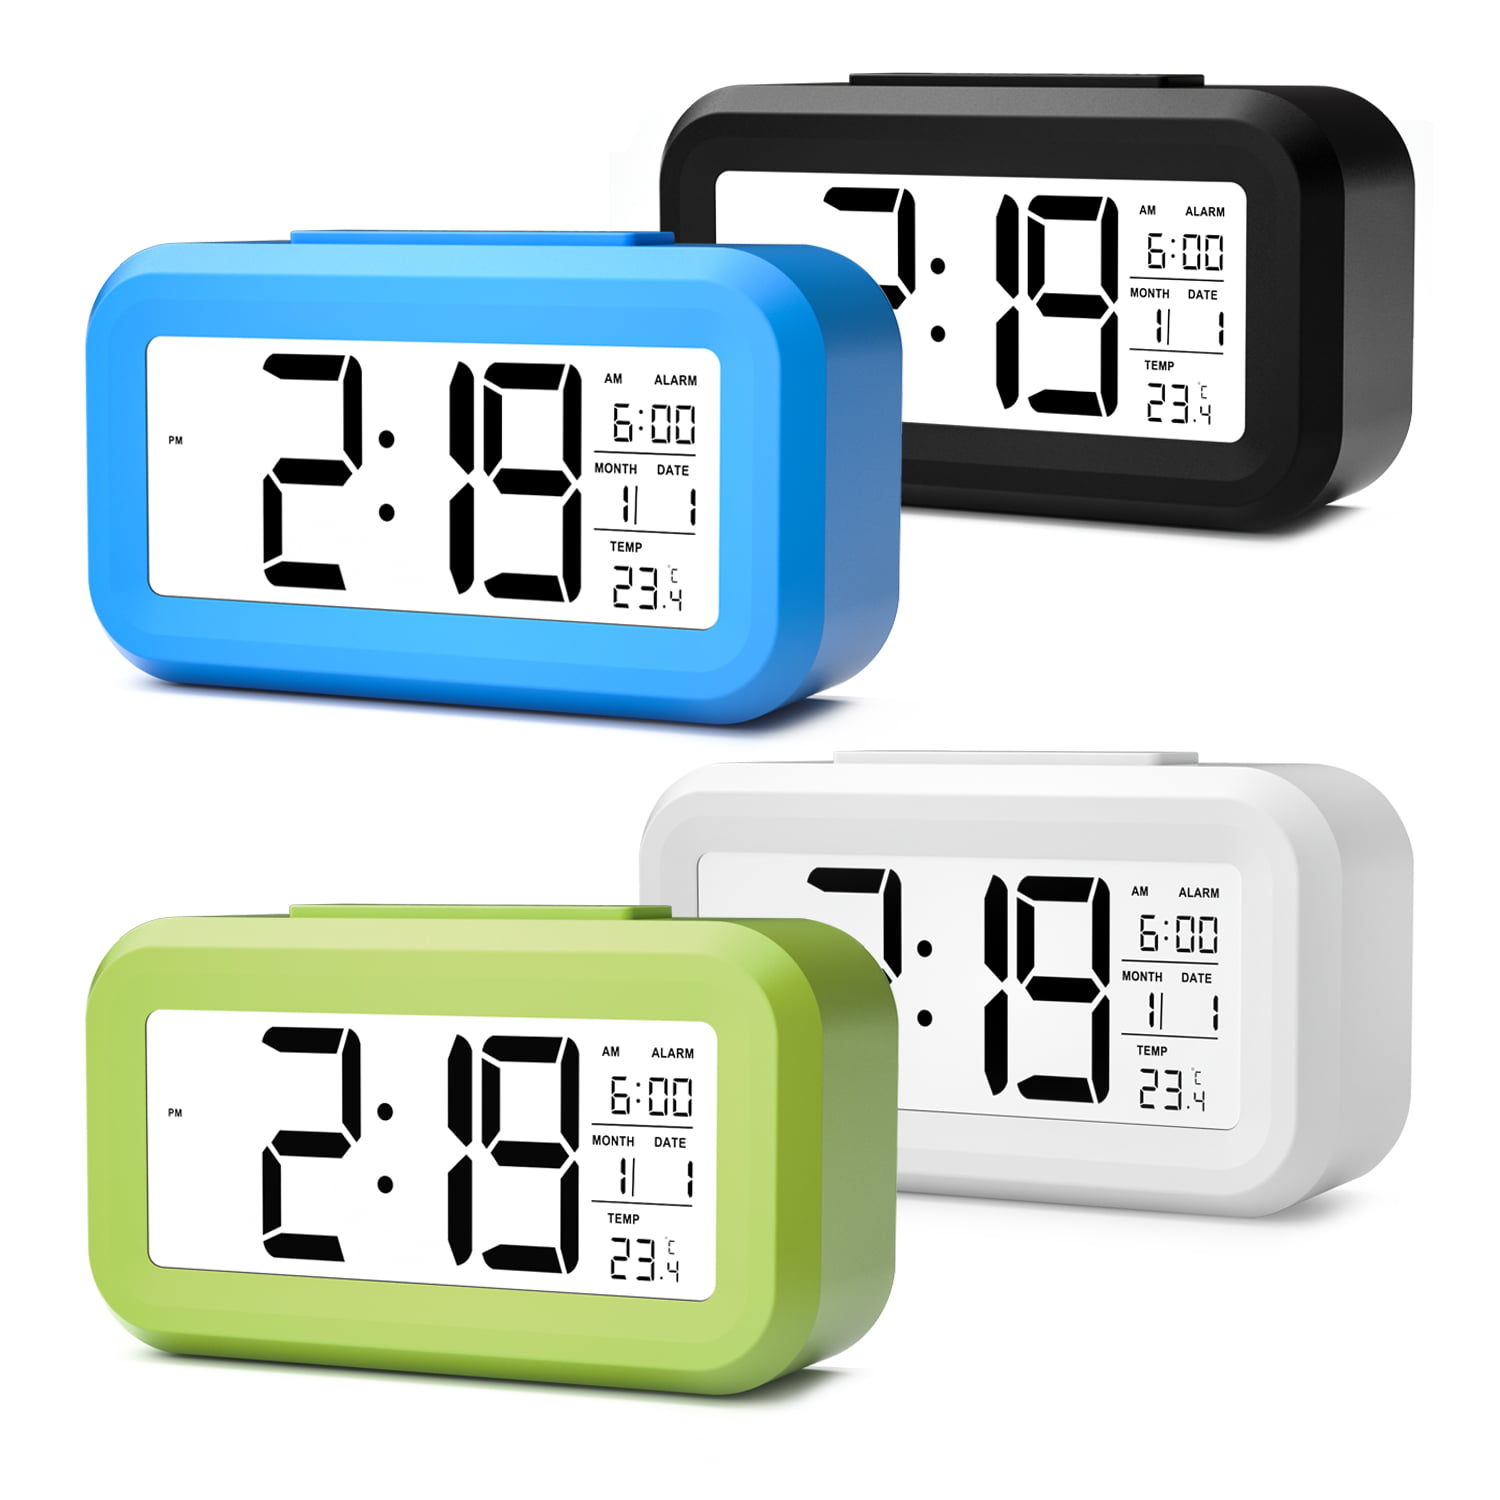 Digital LCD Display Alarm Clock Calendar Thermometer Temperature with Backlight 